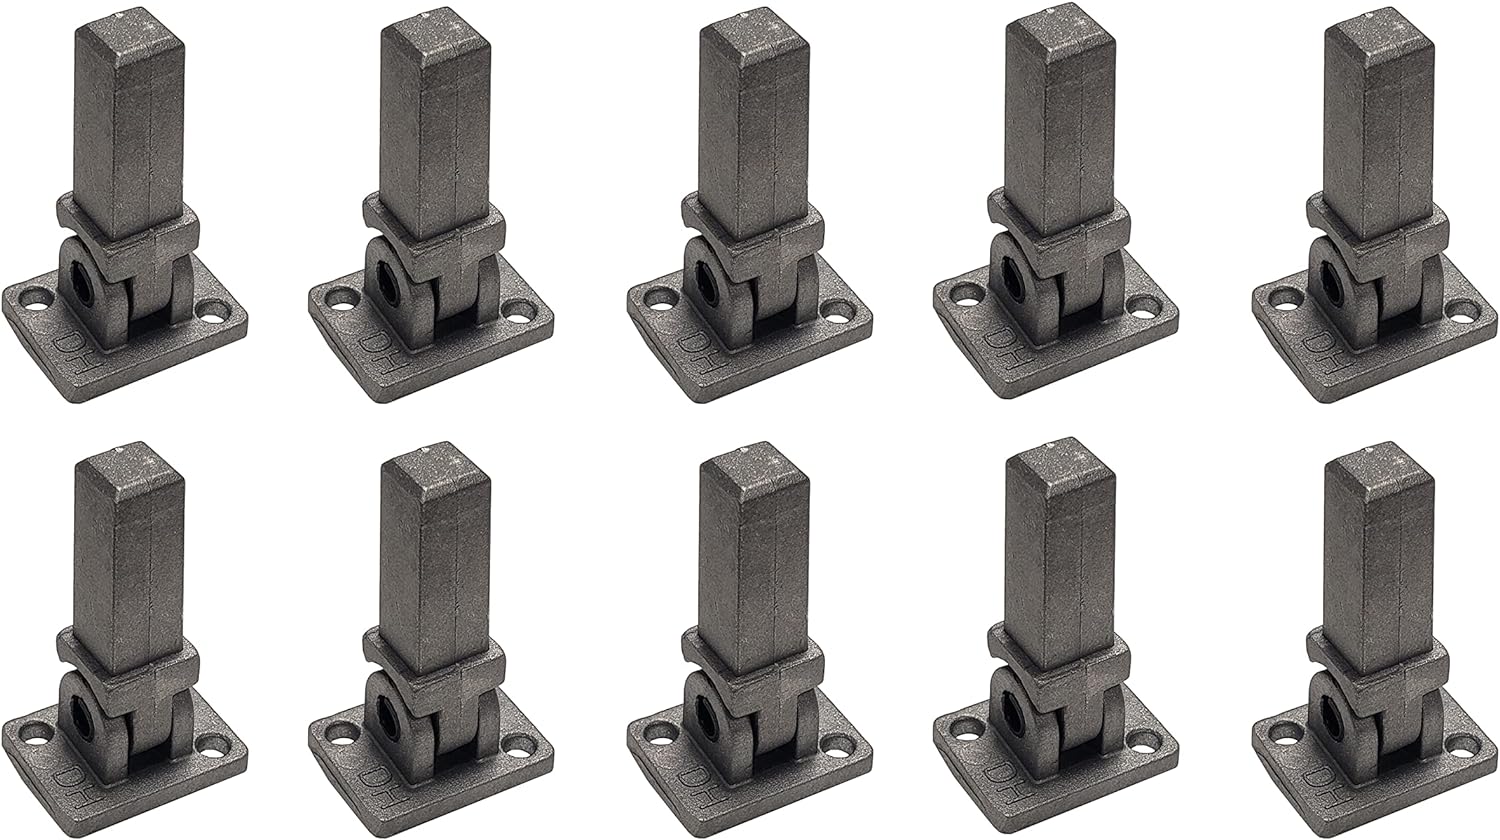 Decorex Hardware Baluster Swivel Connectors with Set of Screws for Use with 1/2" Hollow Square Iron Balusters - 10 Pack - DHSBC